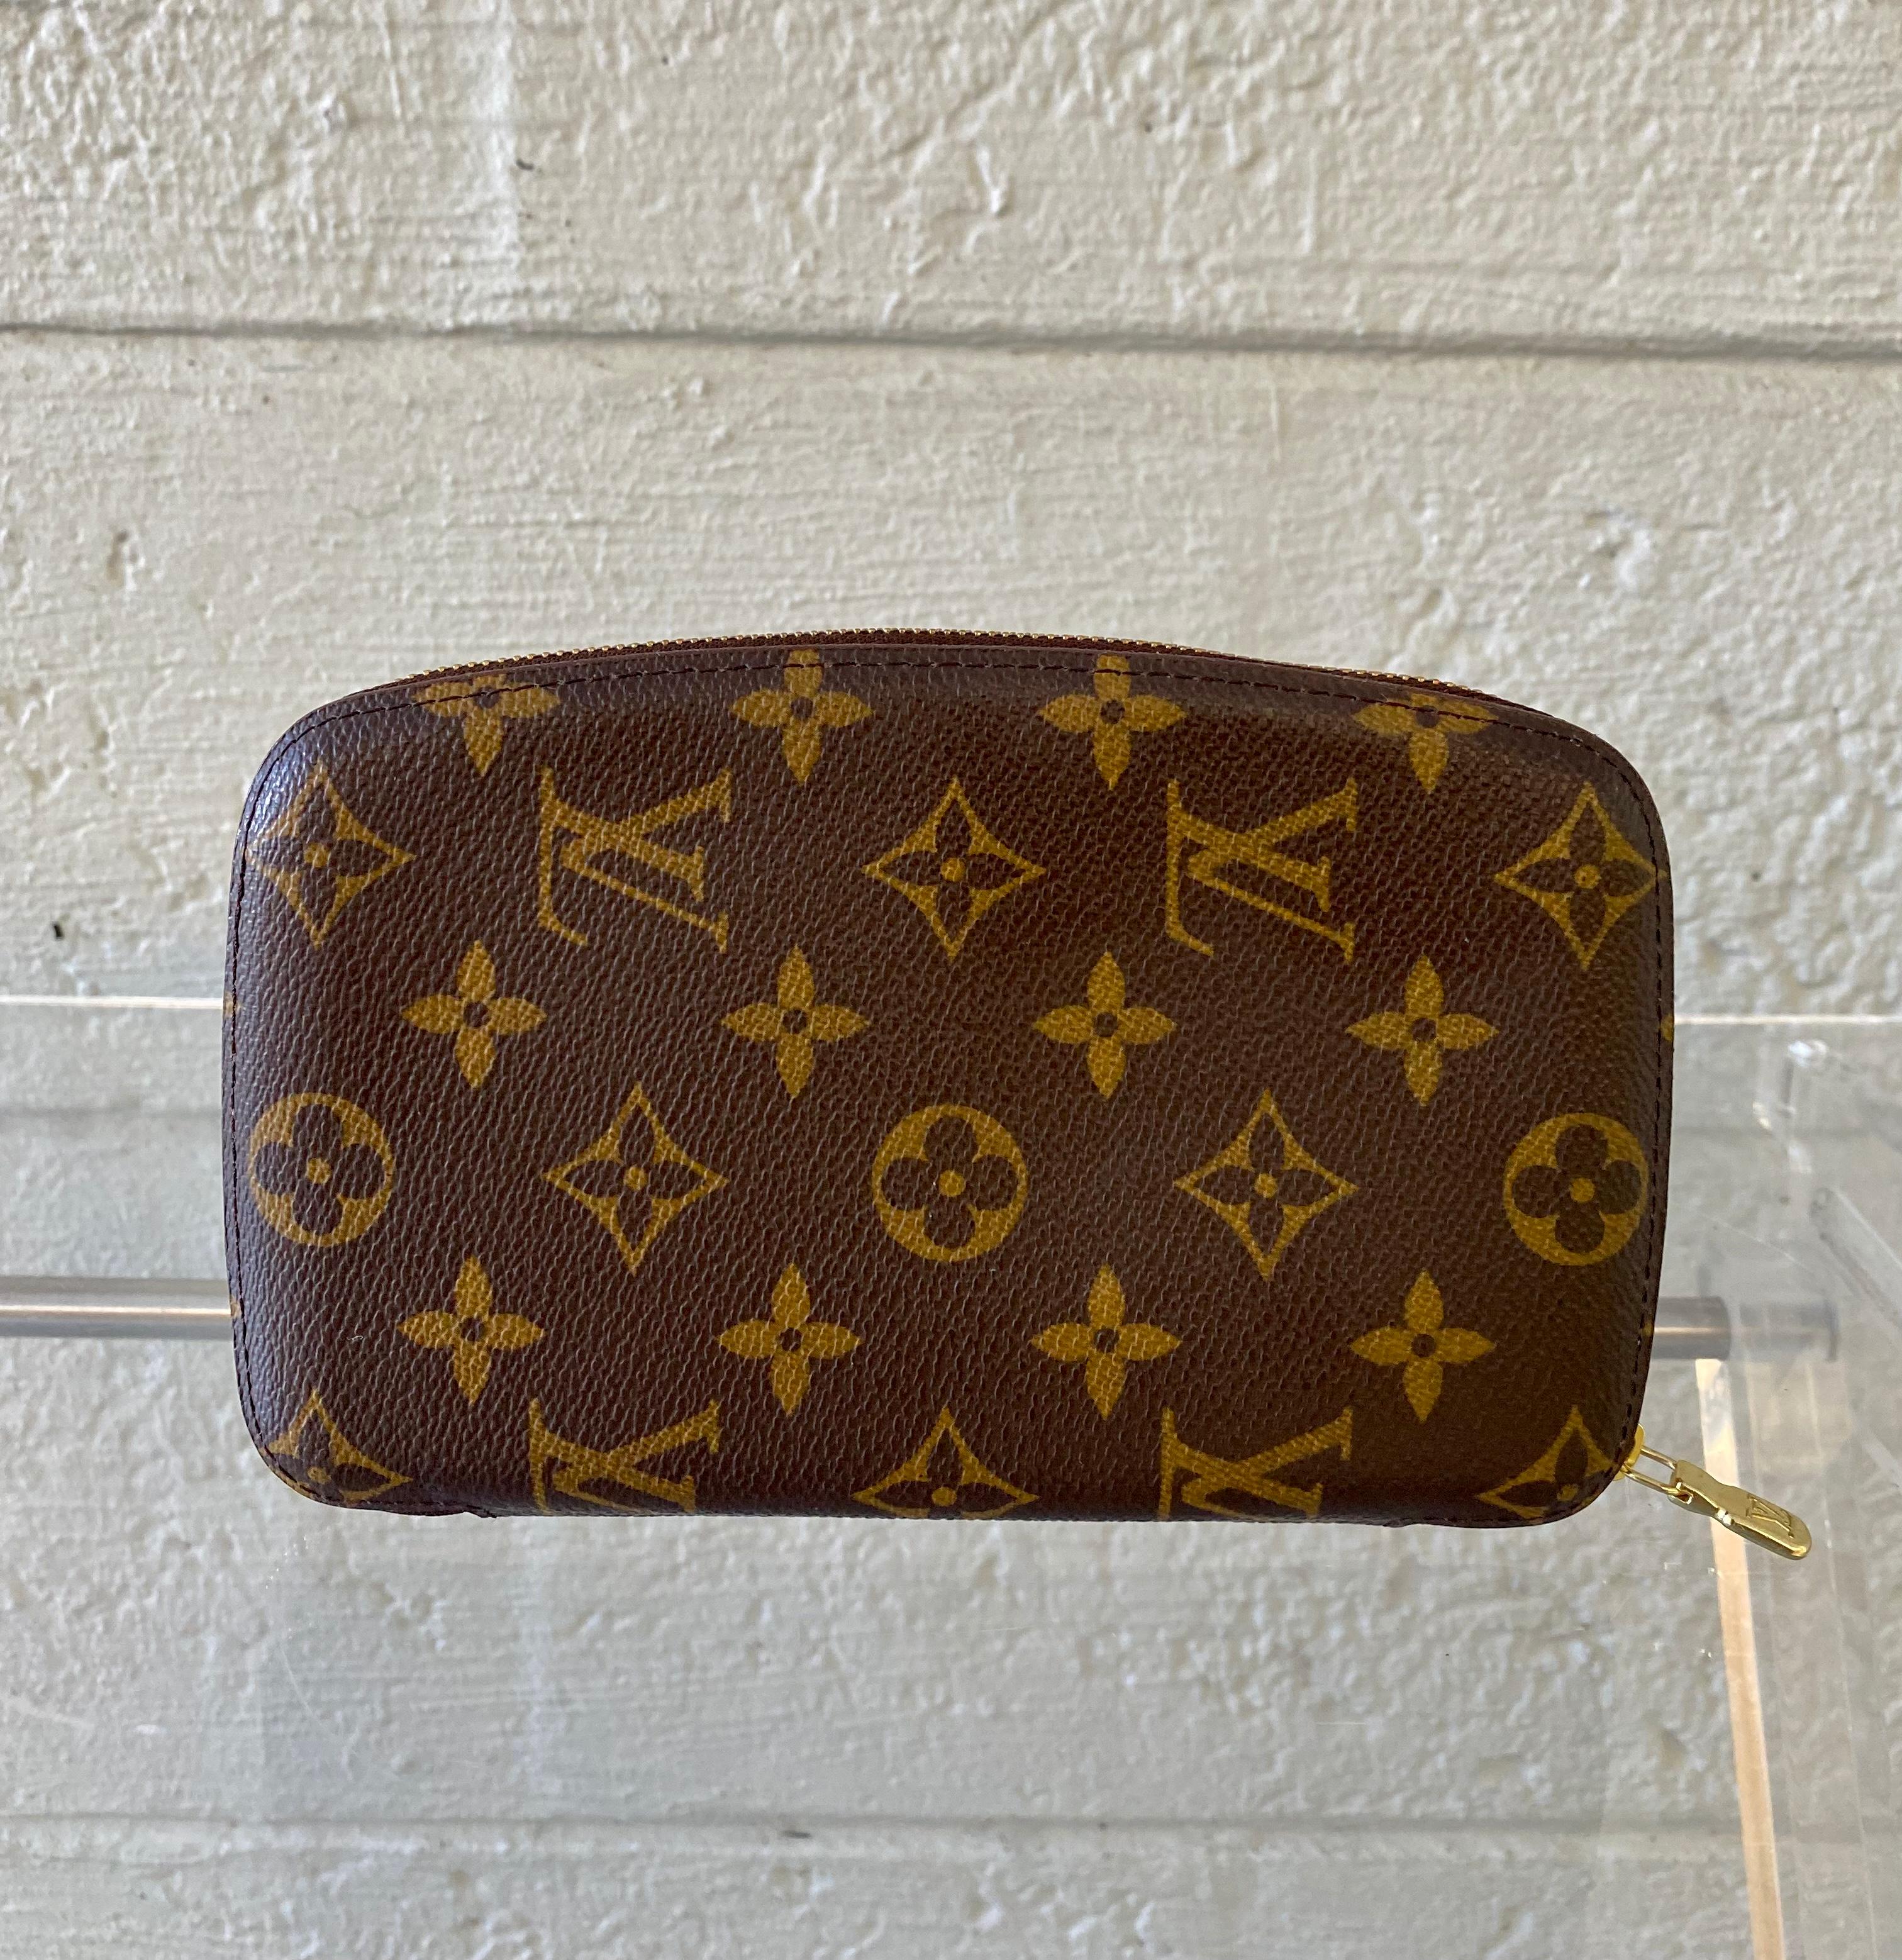 This vintage wallet is crafted of signature Louis Vuitton monogram on toile canvas. This wallet features a brass wrap-around zipper that opens to a cross-grain leather interior with card slots and three patch pockets. It holds you iPhone as well.